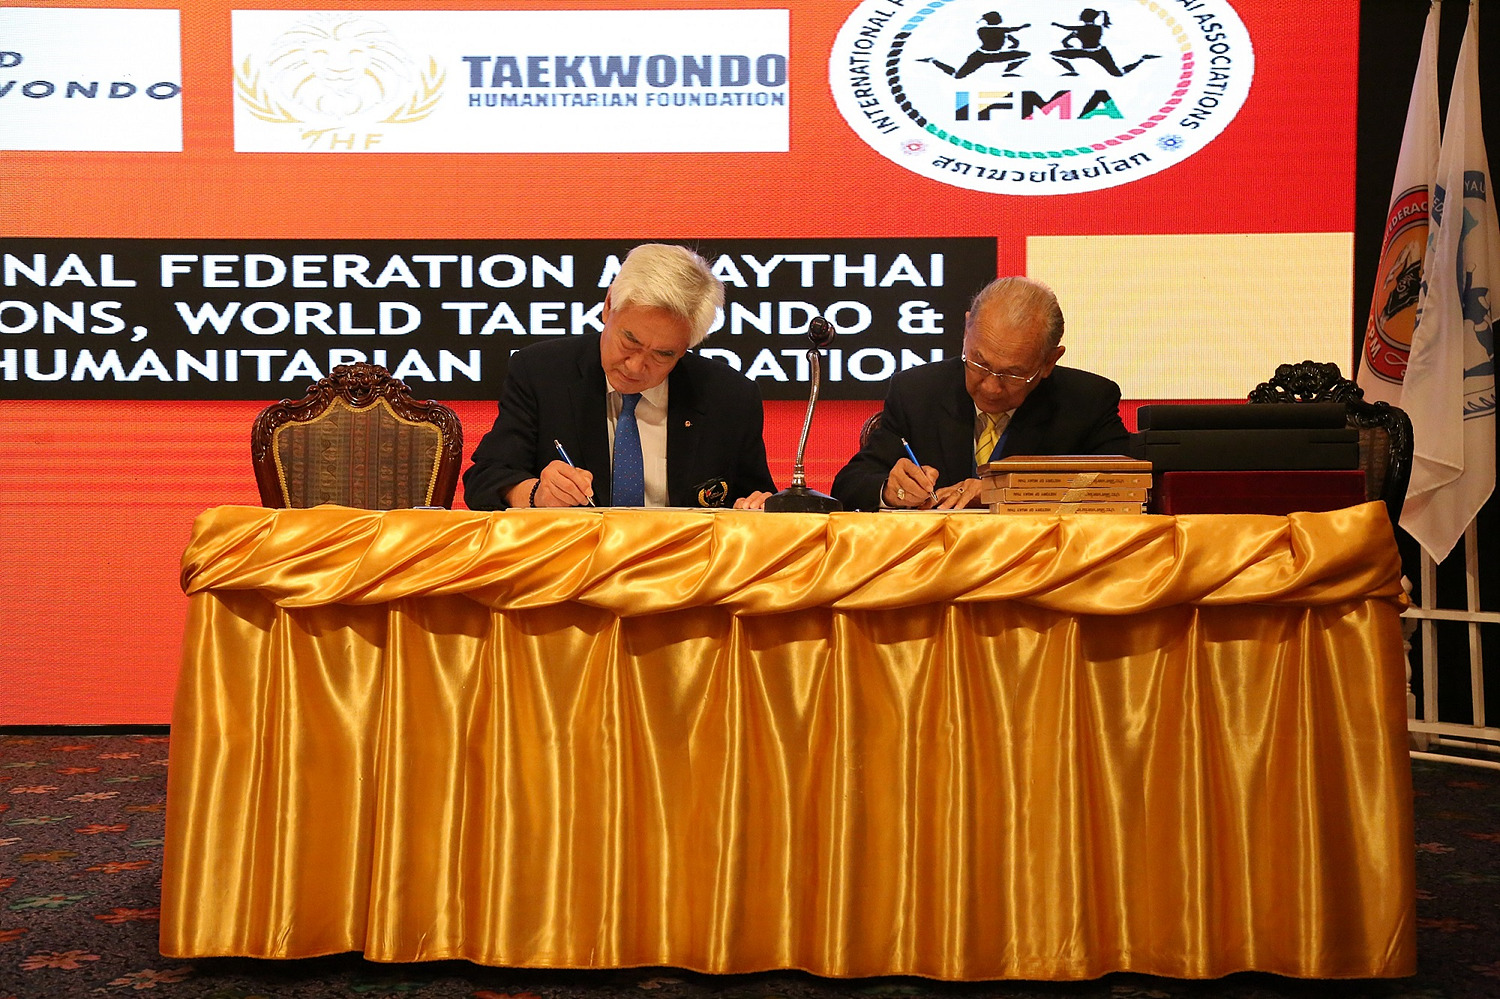 20190727-WT and IFMA signed MOU.2